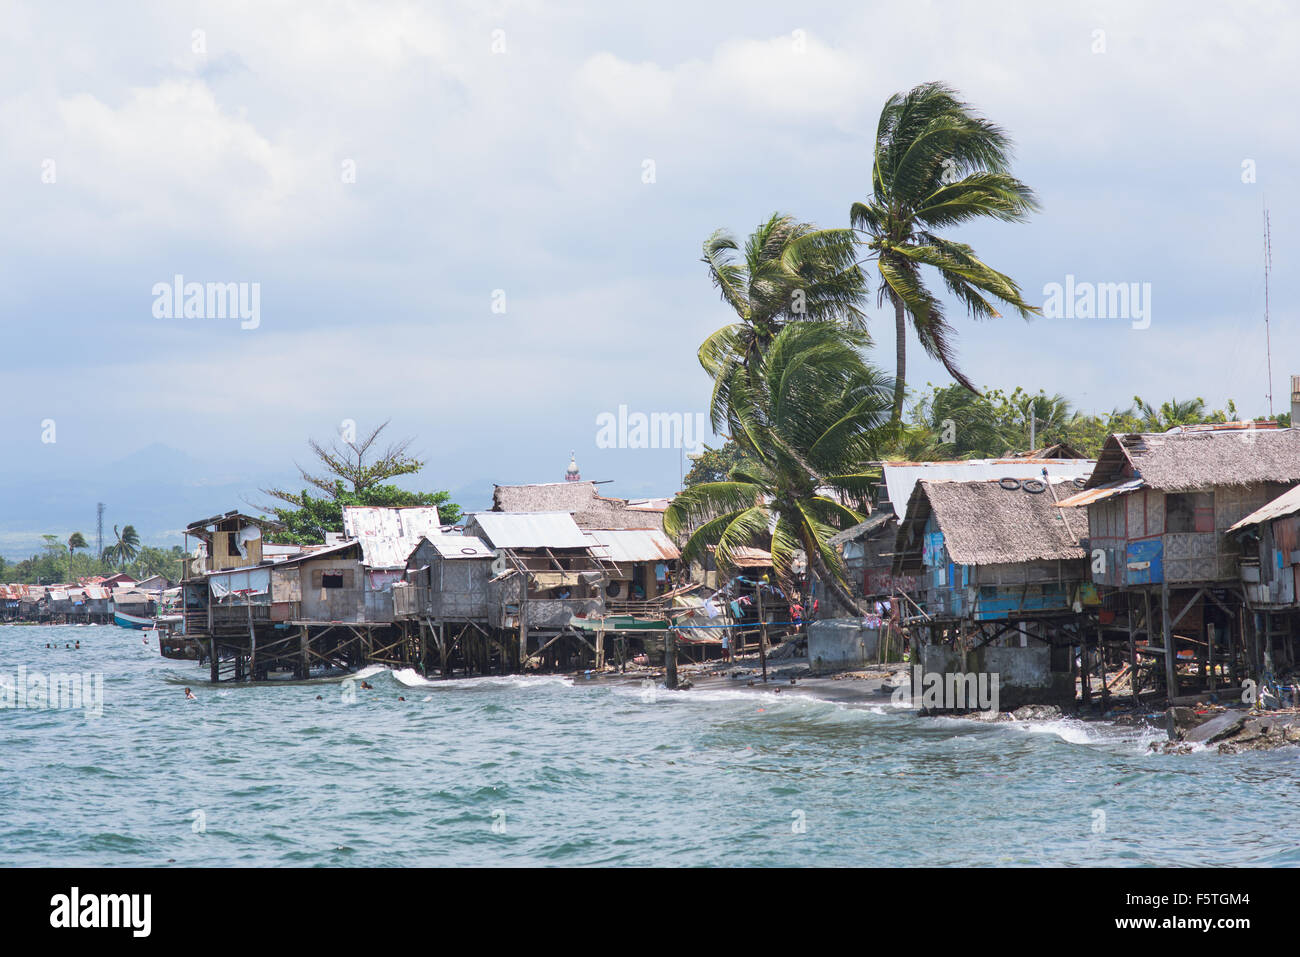 Shanty town at the sea in General Santos City, the southernmost city in The Philippines. Stock Photo